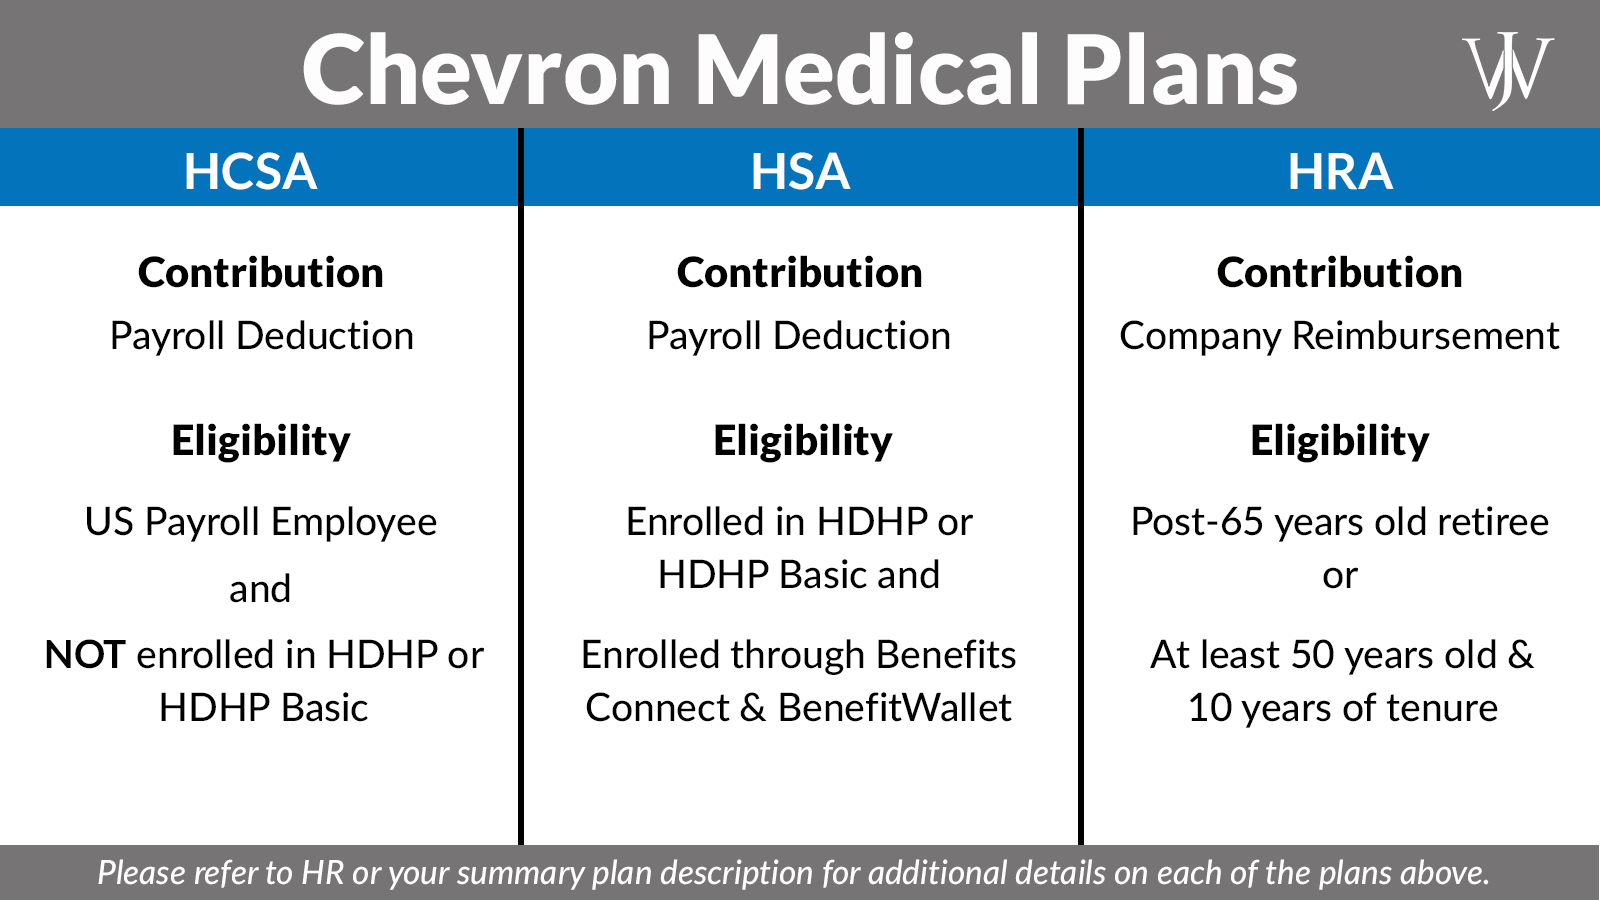 HSA vs. HRA: which is better to offer employees?, Blog posts